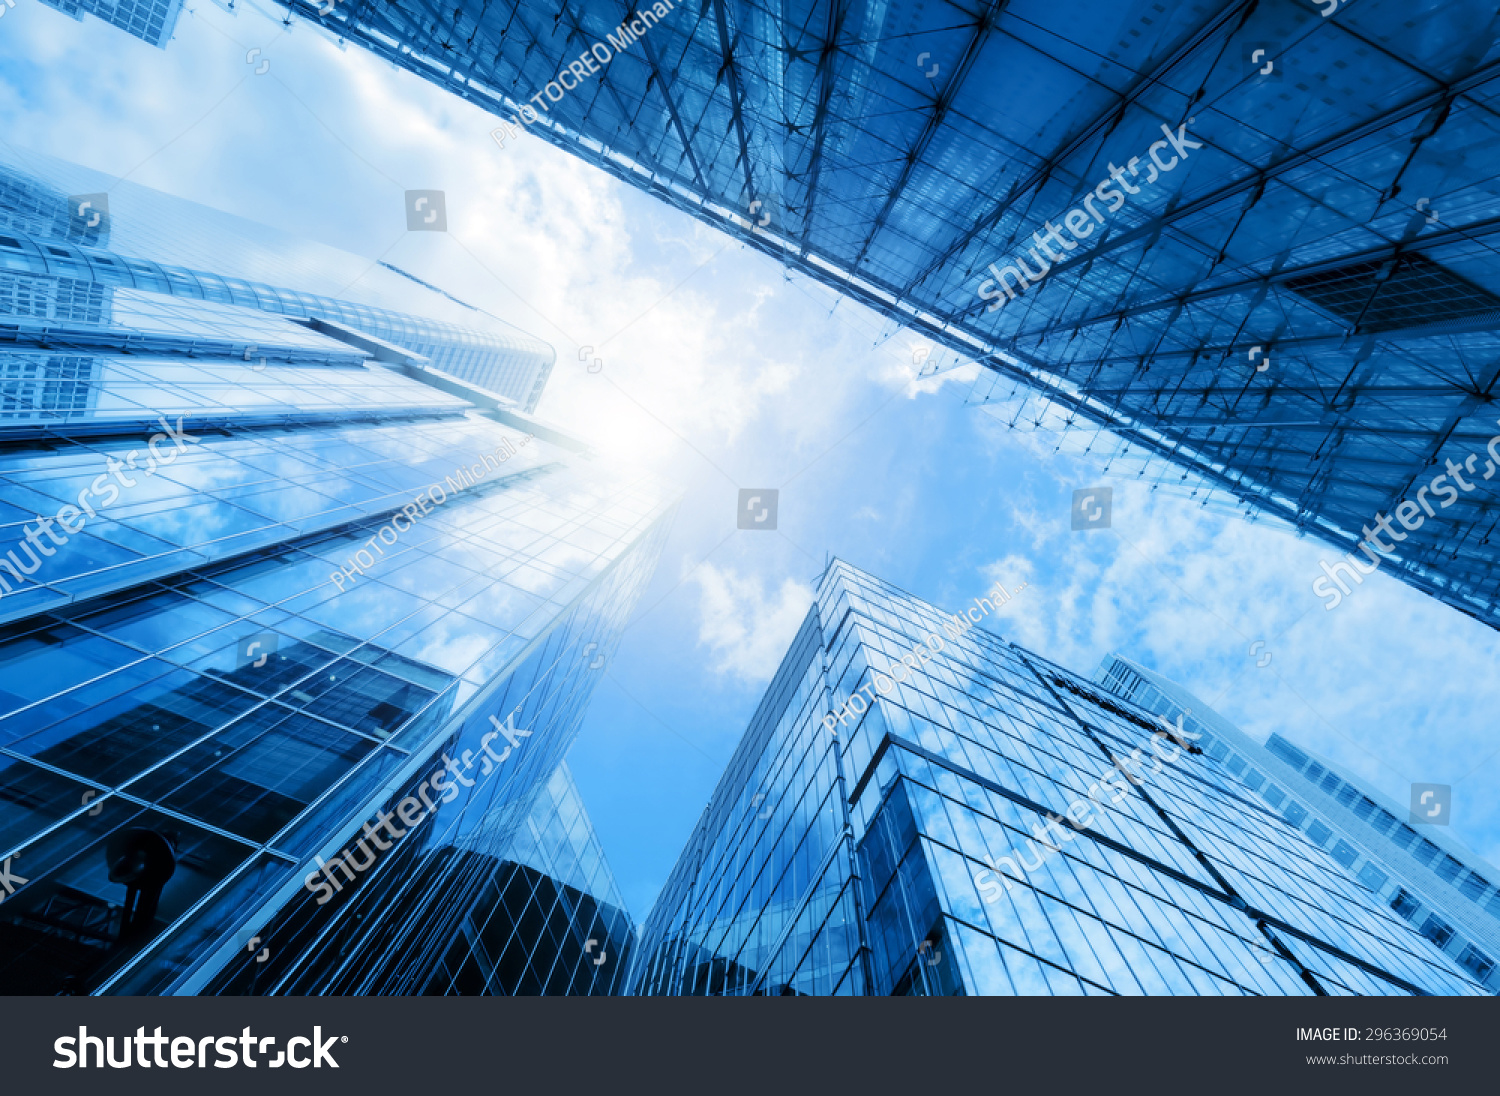 Common modern business skyscrapers, high-rise buildings, architecture raising to the sky, sun. Concepts of financial, economics, future etc. #296369054